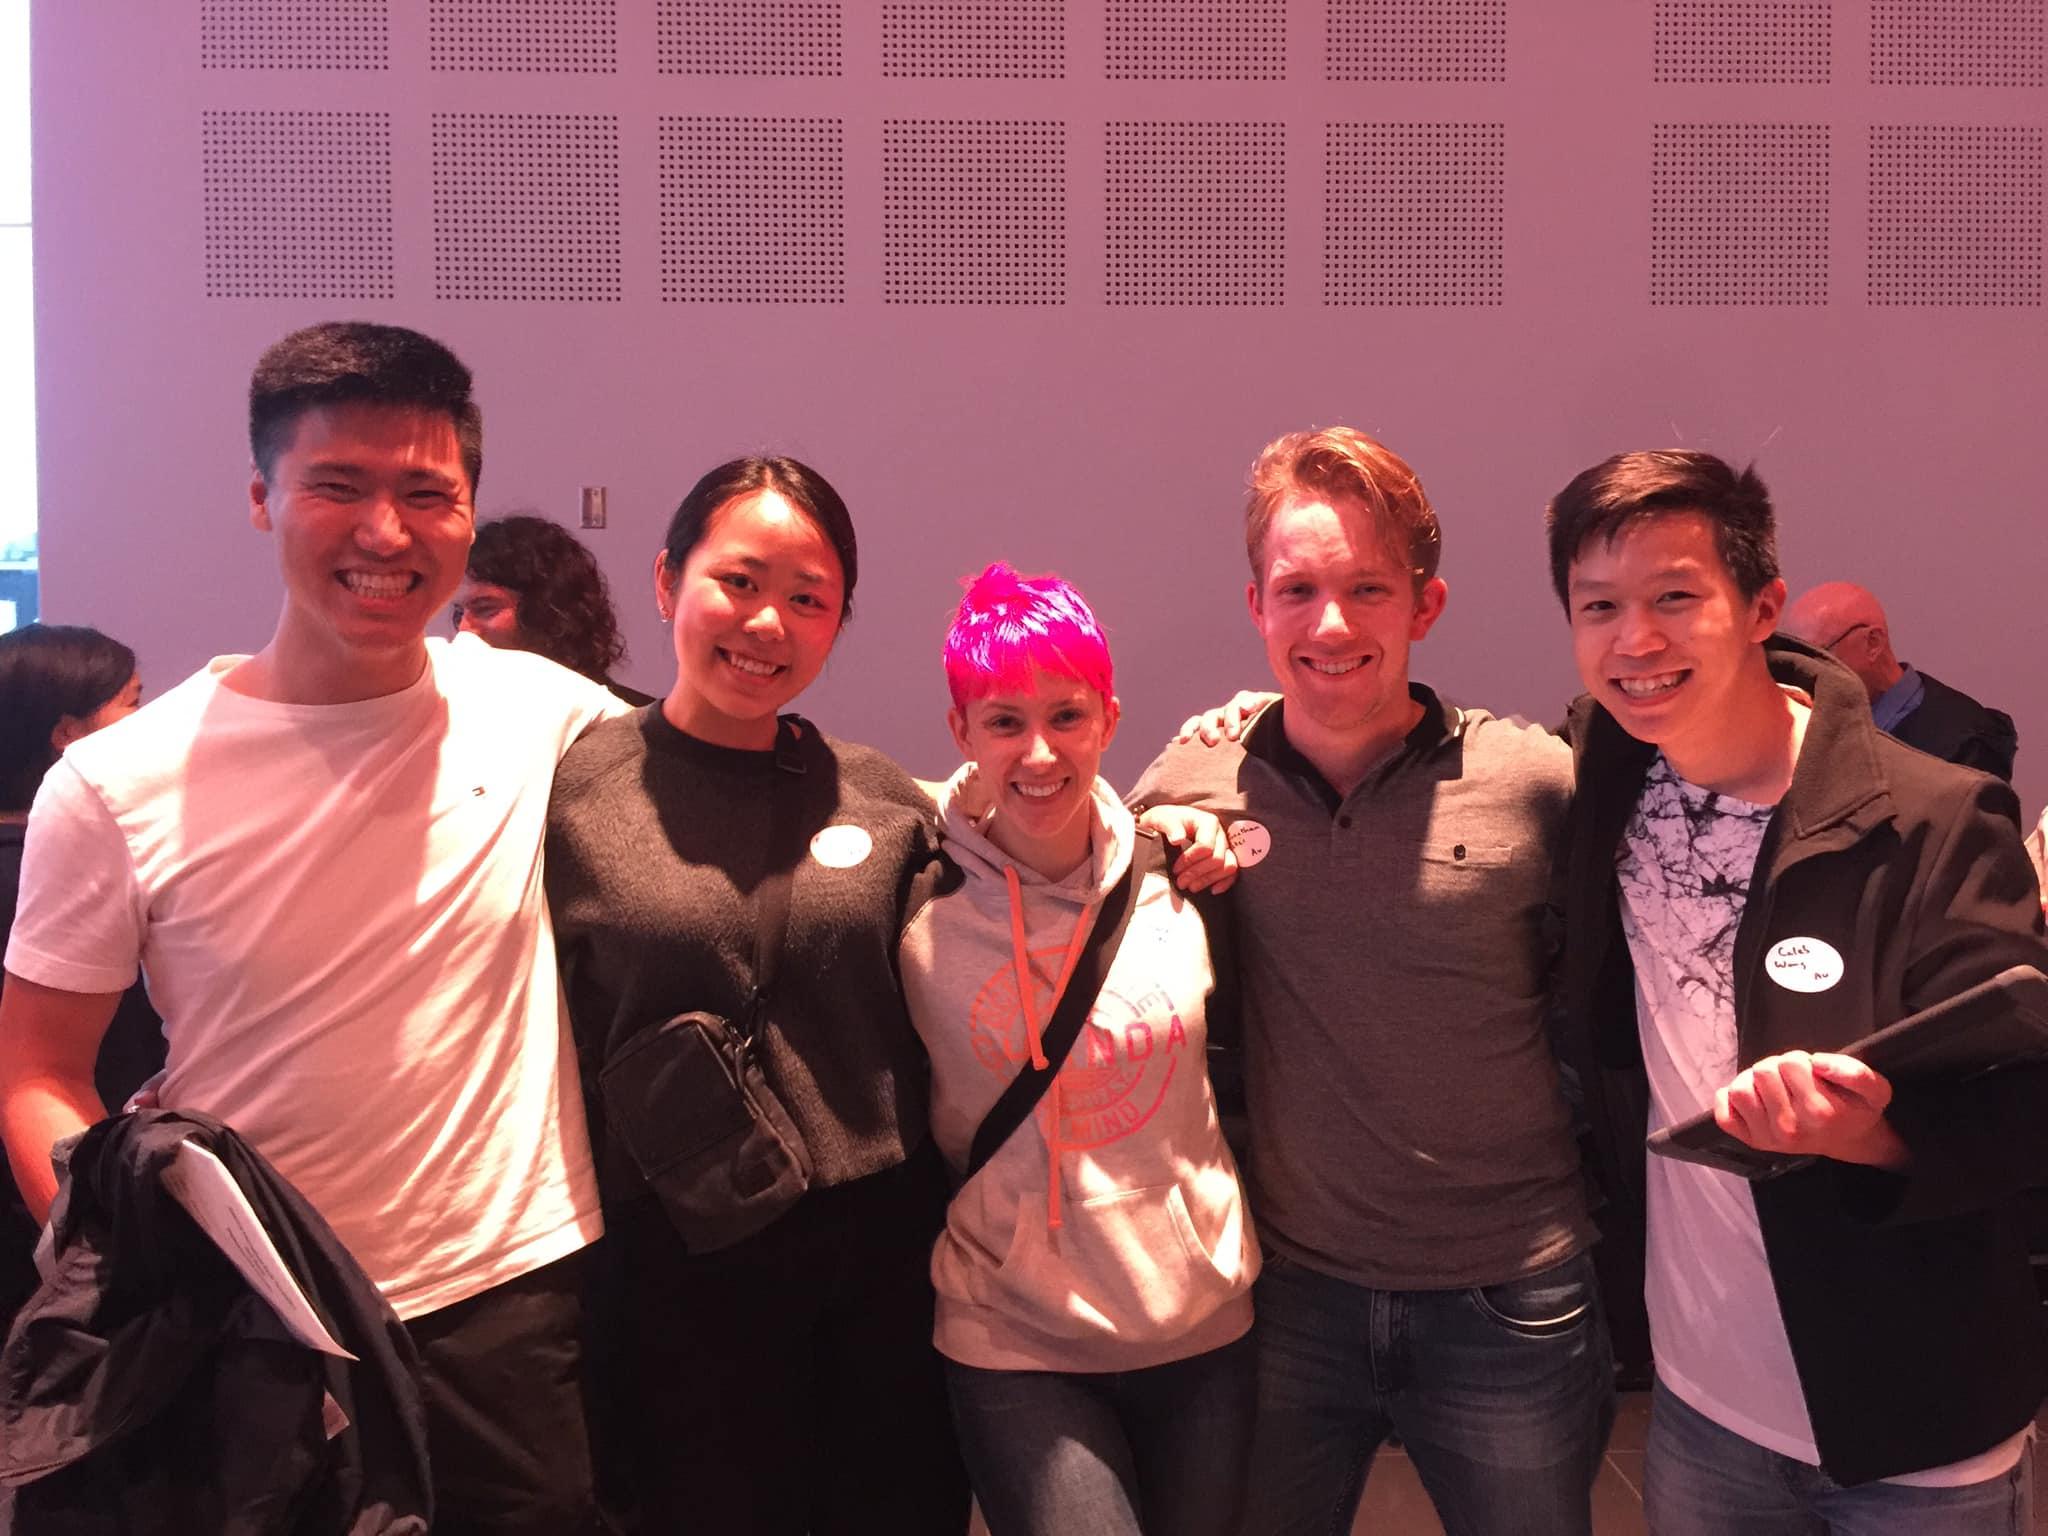 Eliza with fellow ANAM musicians Andrew Fong (clarinet 2019), Carol Wang (bassoon 2019), Caleb Wong (cello 2019) and Jonathan Békés (cello 2017) during the 2018 Gisborne International Music Festival in New Zeland   